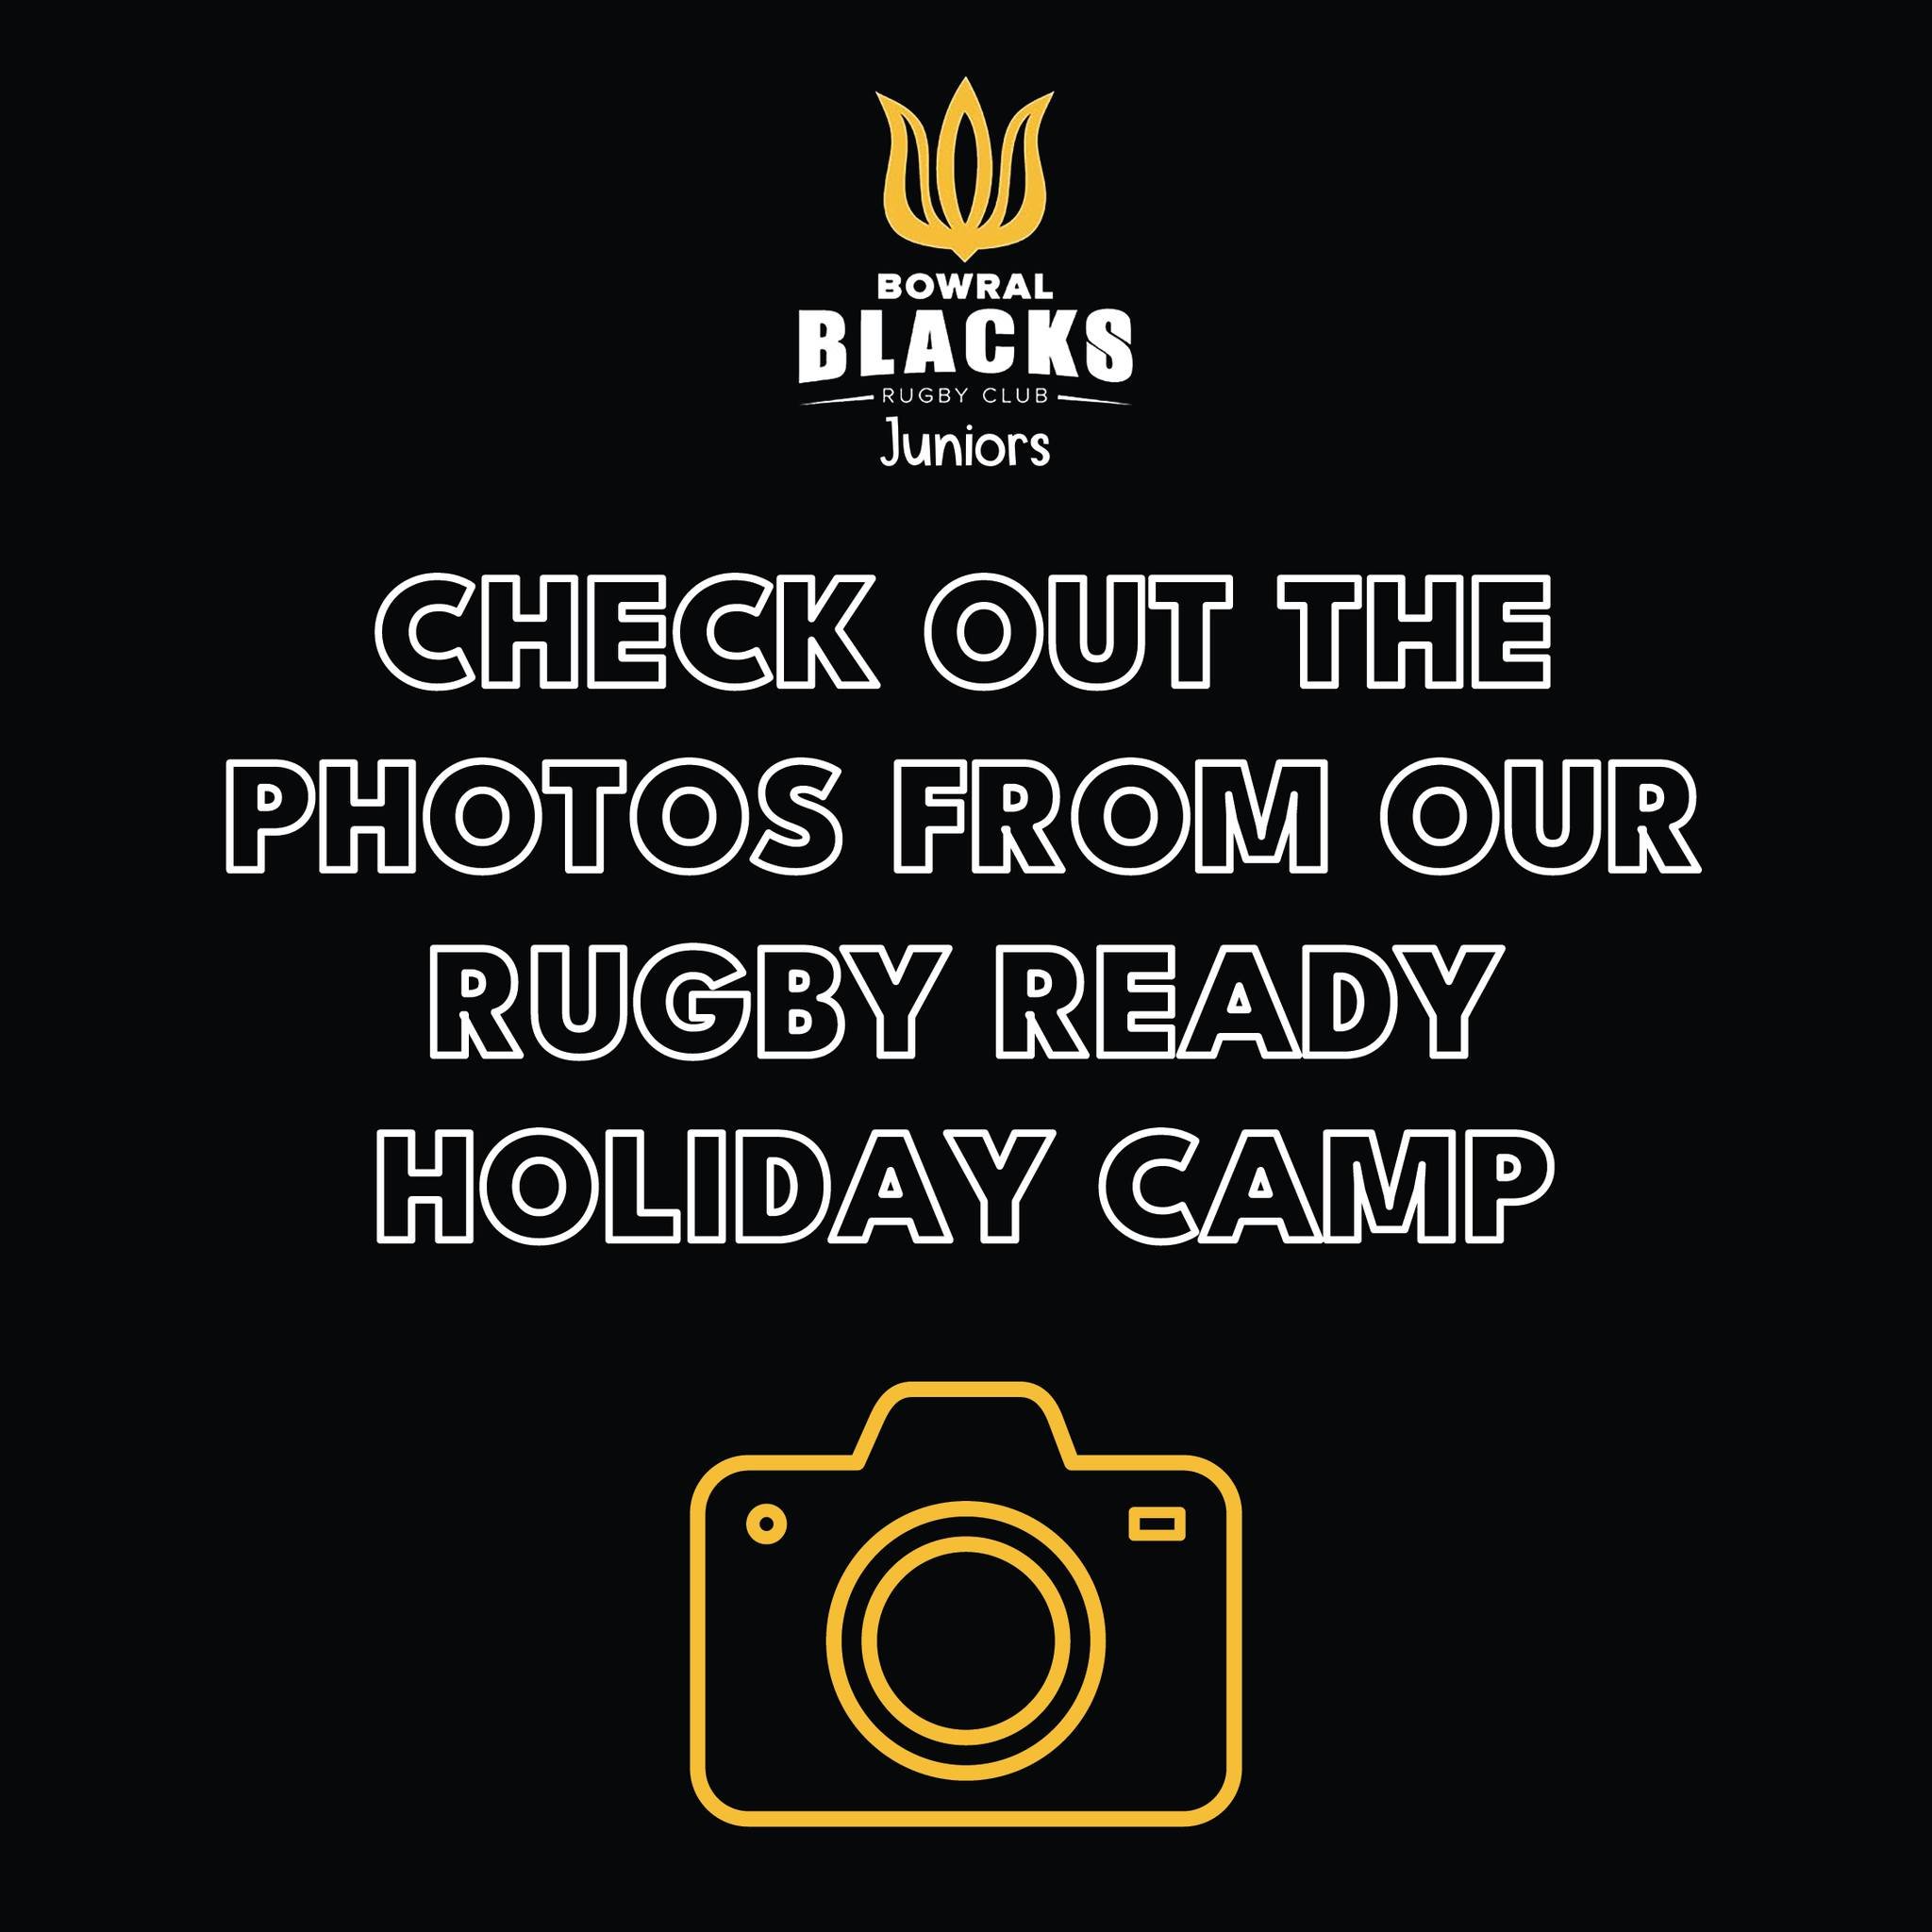 Thank you to all the players who took part in our Juniors Rugby Ready Holiday Camp this week, it looks like you all had a blast and came away with some amazing rugby skills to use this season.

A BIG Thank you to Mitch Inman who ran the holiday camp 